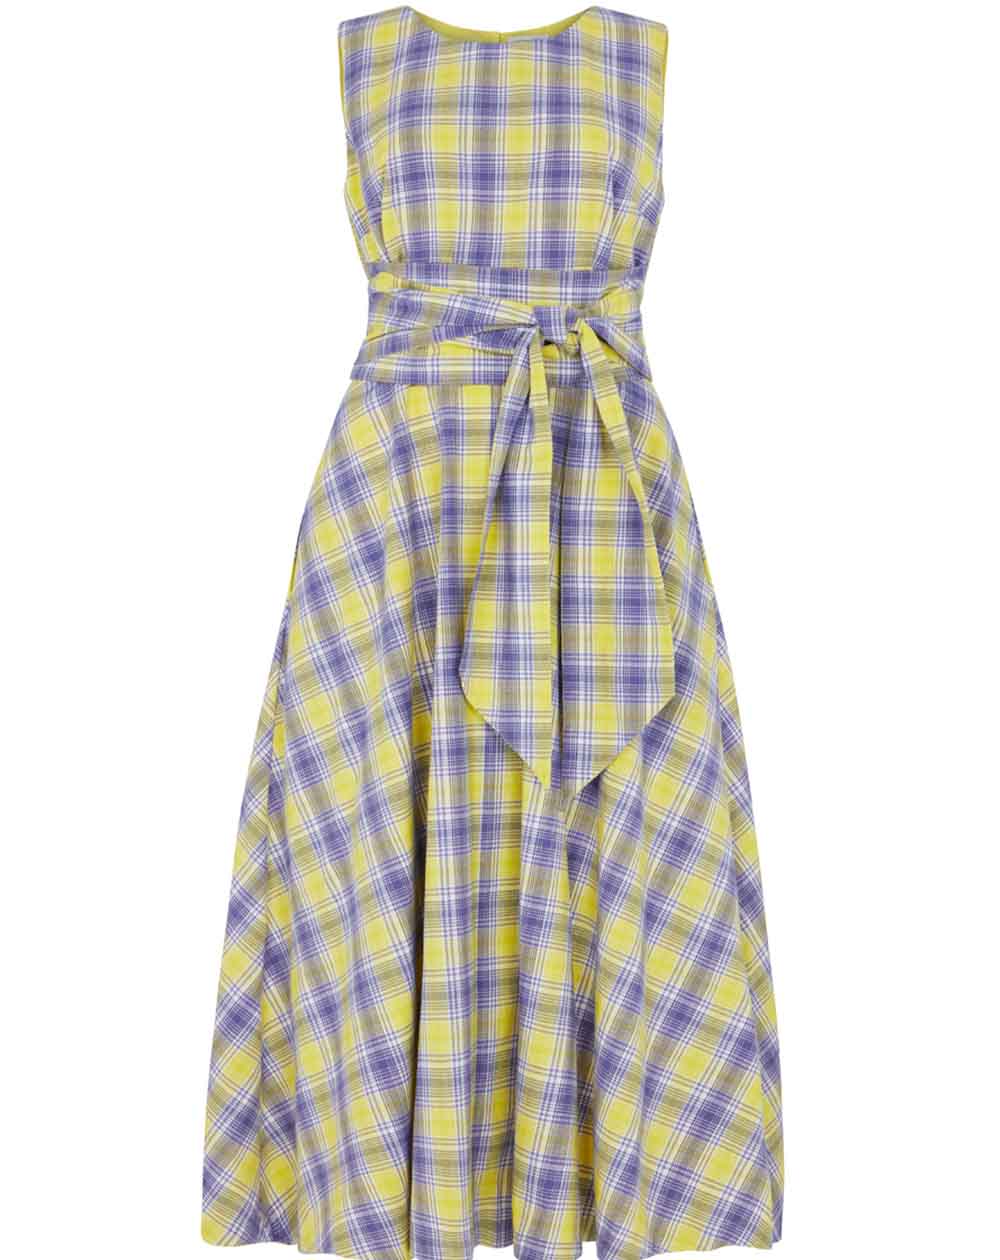 Emily and Fin Roberta Dress in Lilac Sunshine Plaid